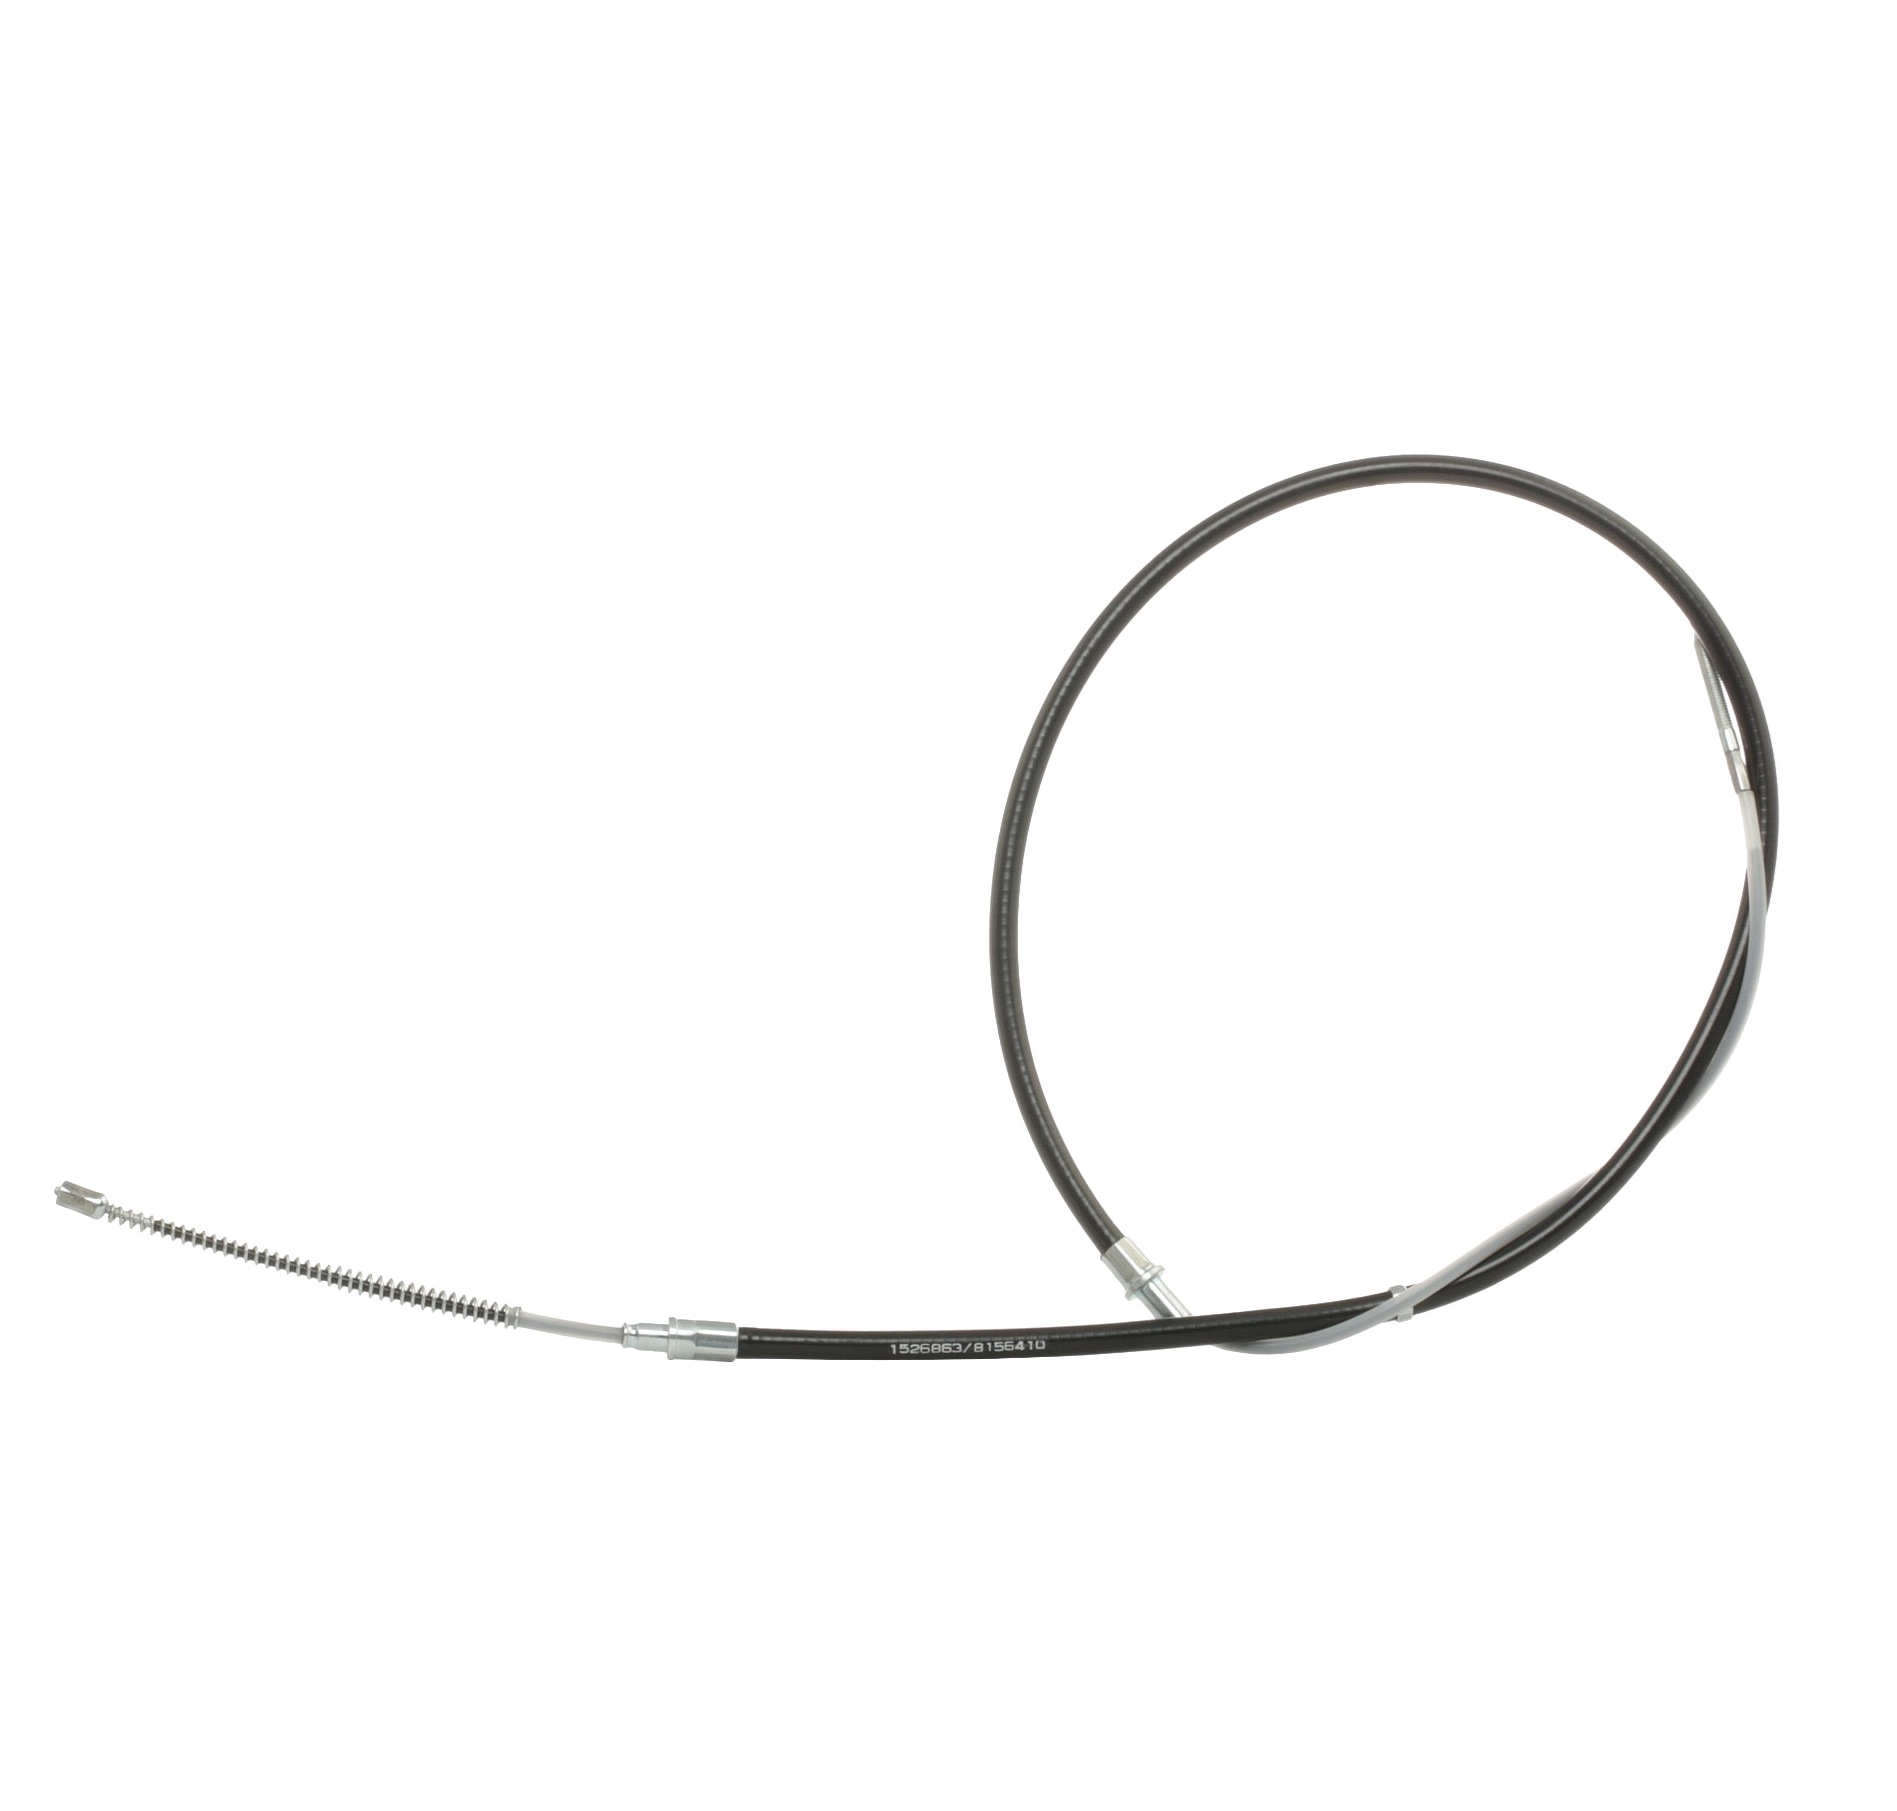 RIDEX 124C0162 Hand brake cable Left Rear, Right Rear, 1498 / 935mm, Drum Brake, for parking brake